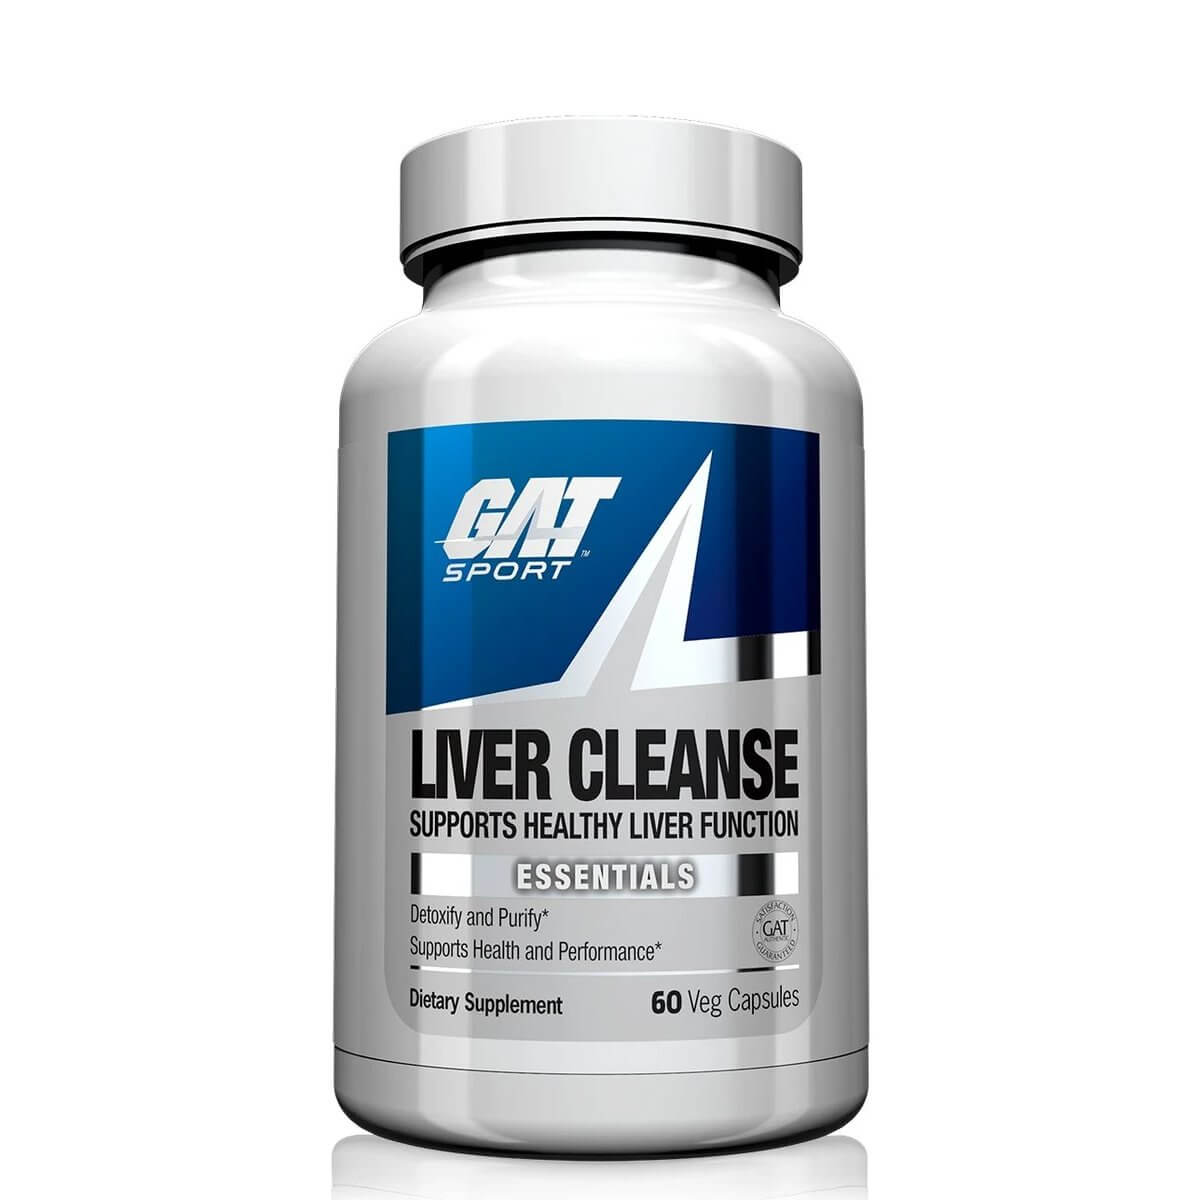 GAT Liver Cleanse